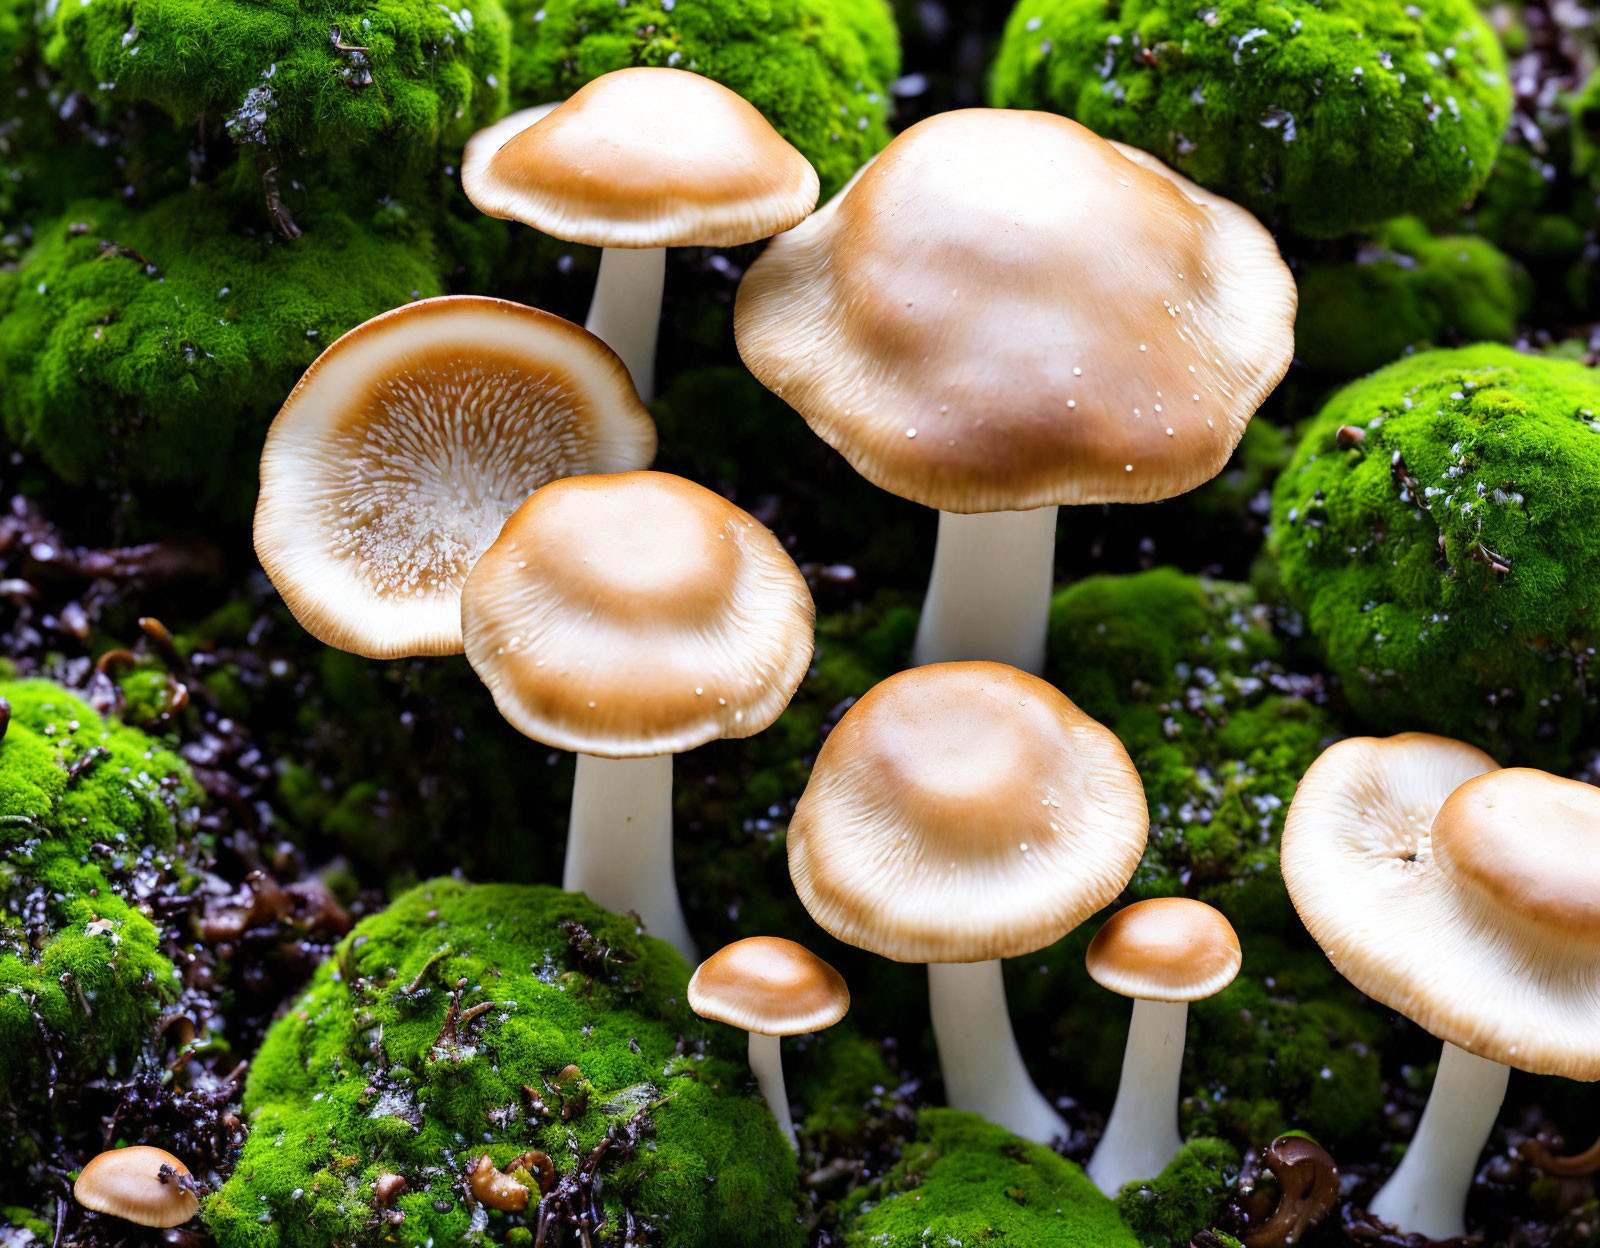 Wild Mushrooms with White Stems and Brown Caps among Moss-Covered Ground